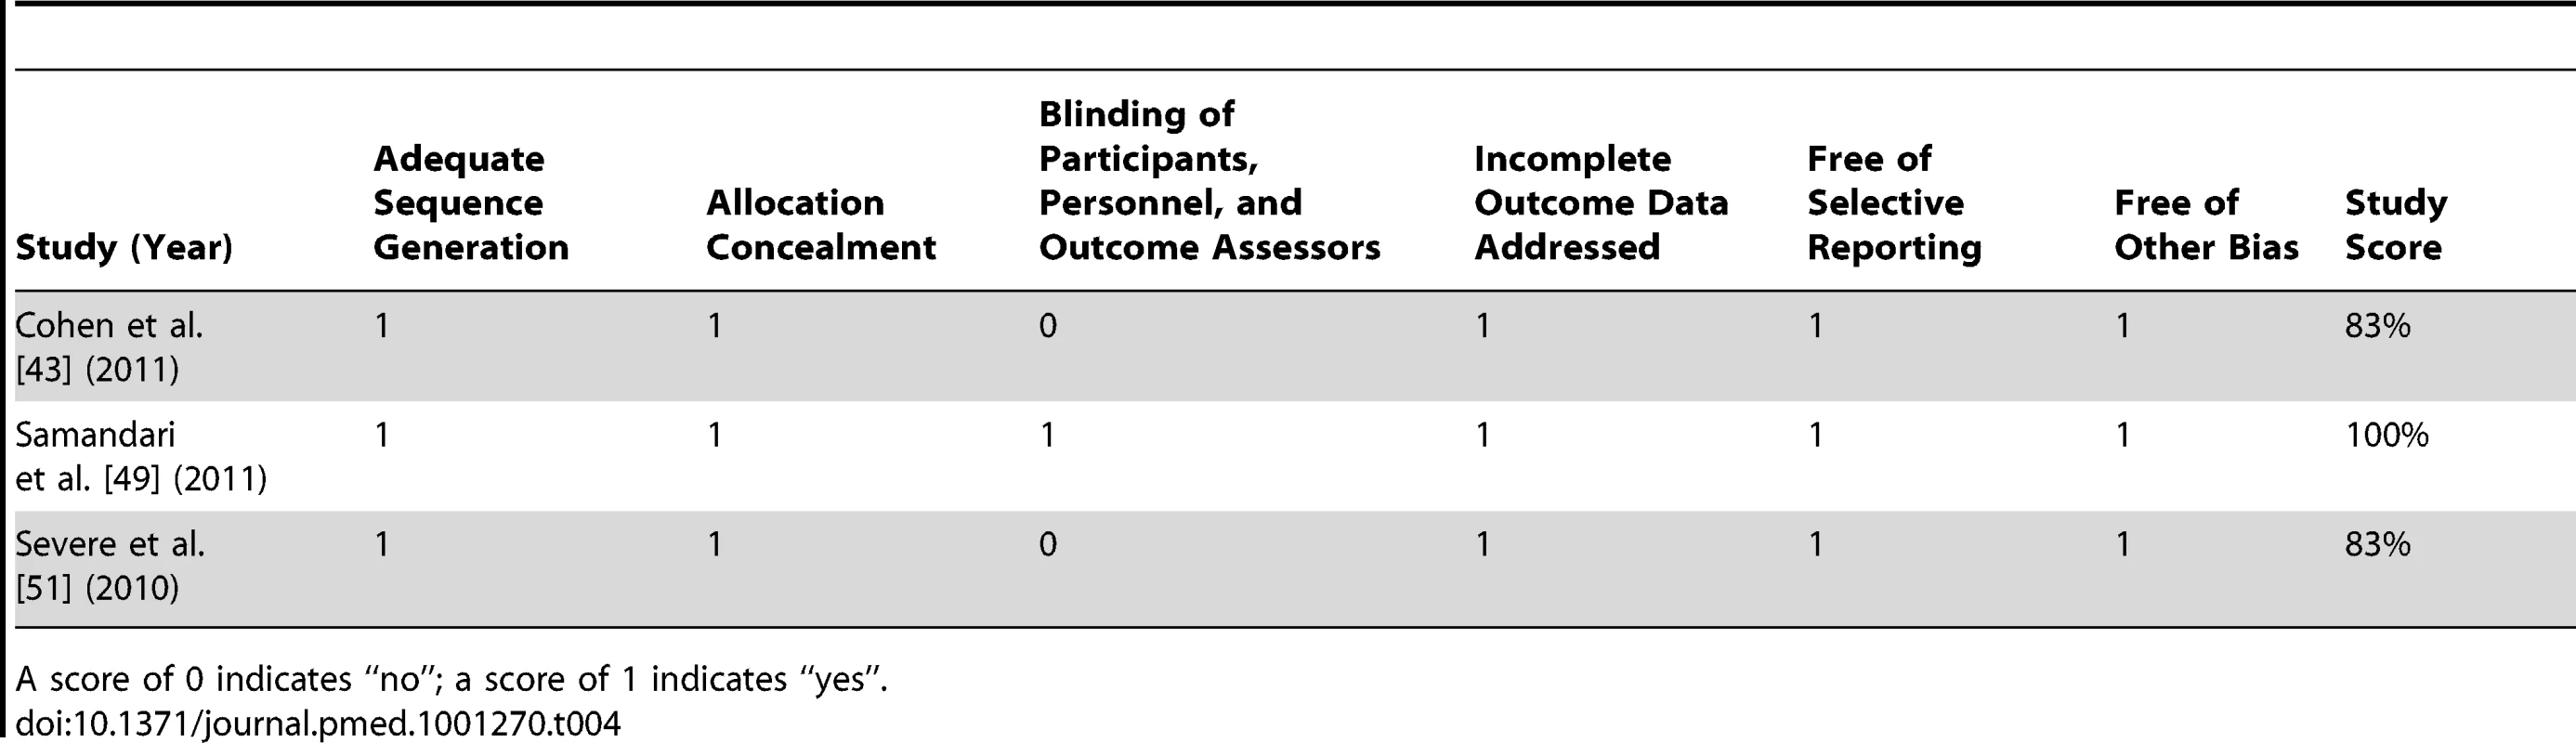 Bias assessment for randomised controlled trials meeting inclusion criteria.